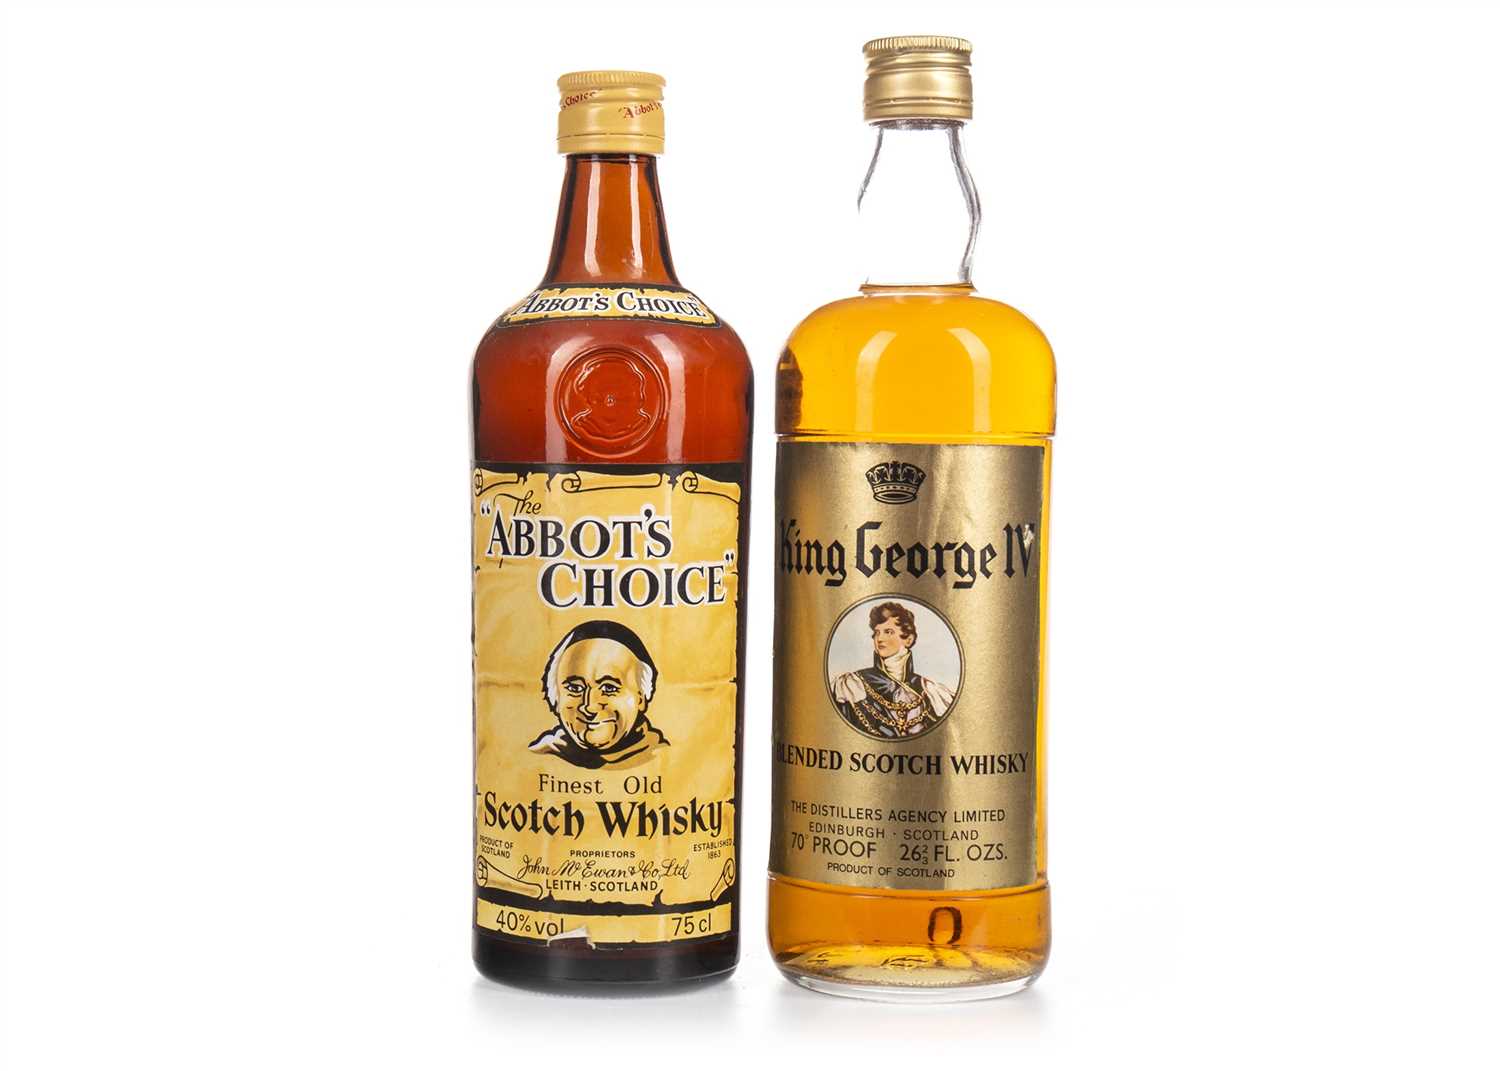 Lot 434 - ABBOT'S CHOICE AND KING GEORGE IV BLEND